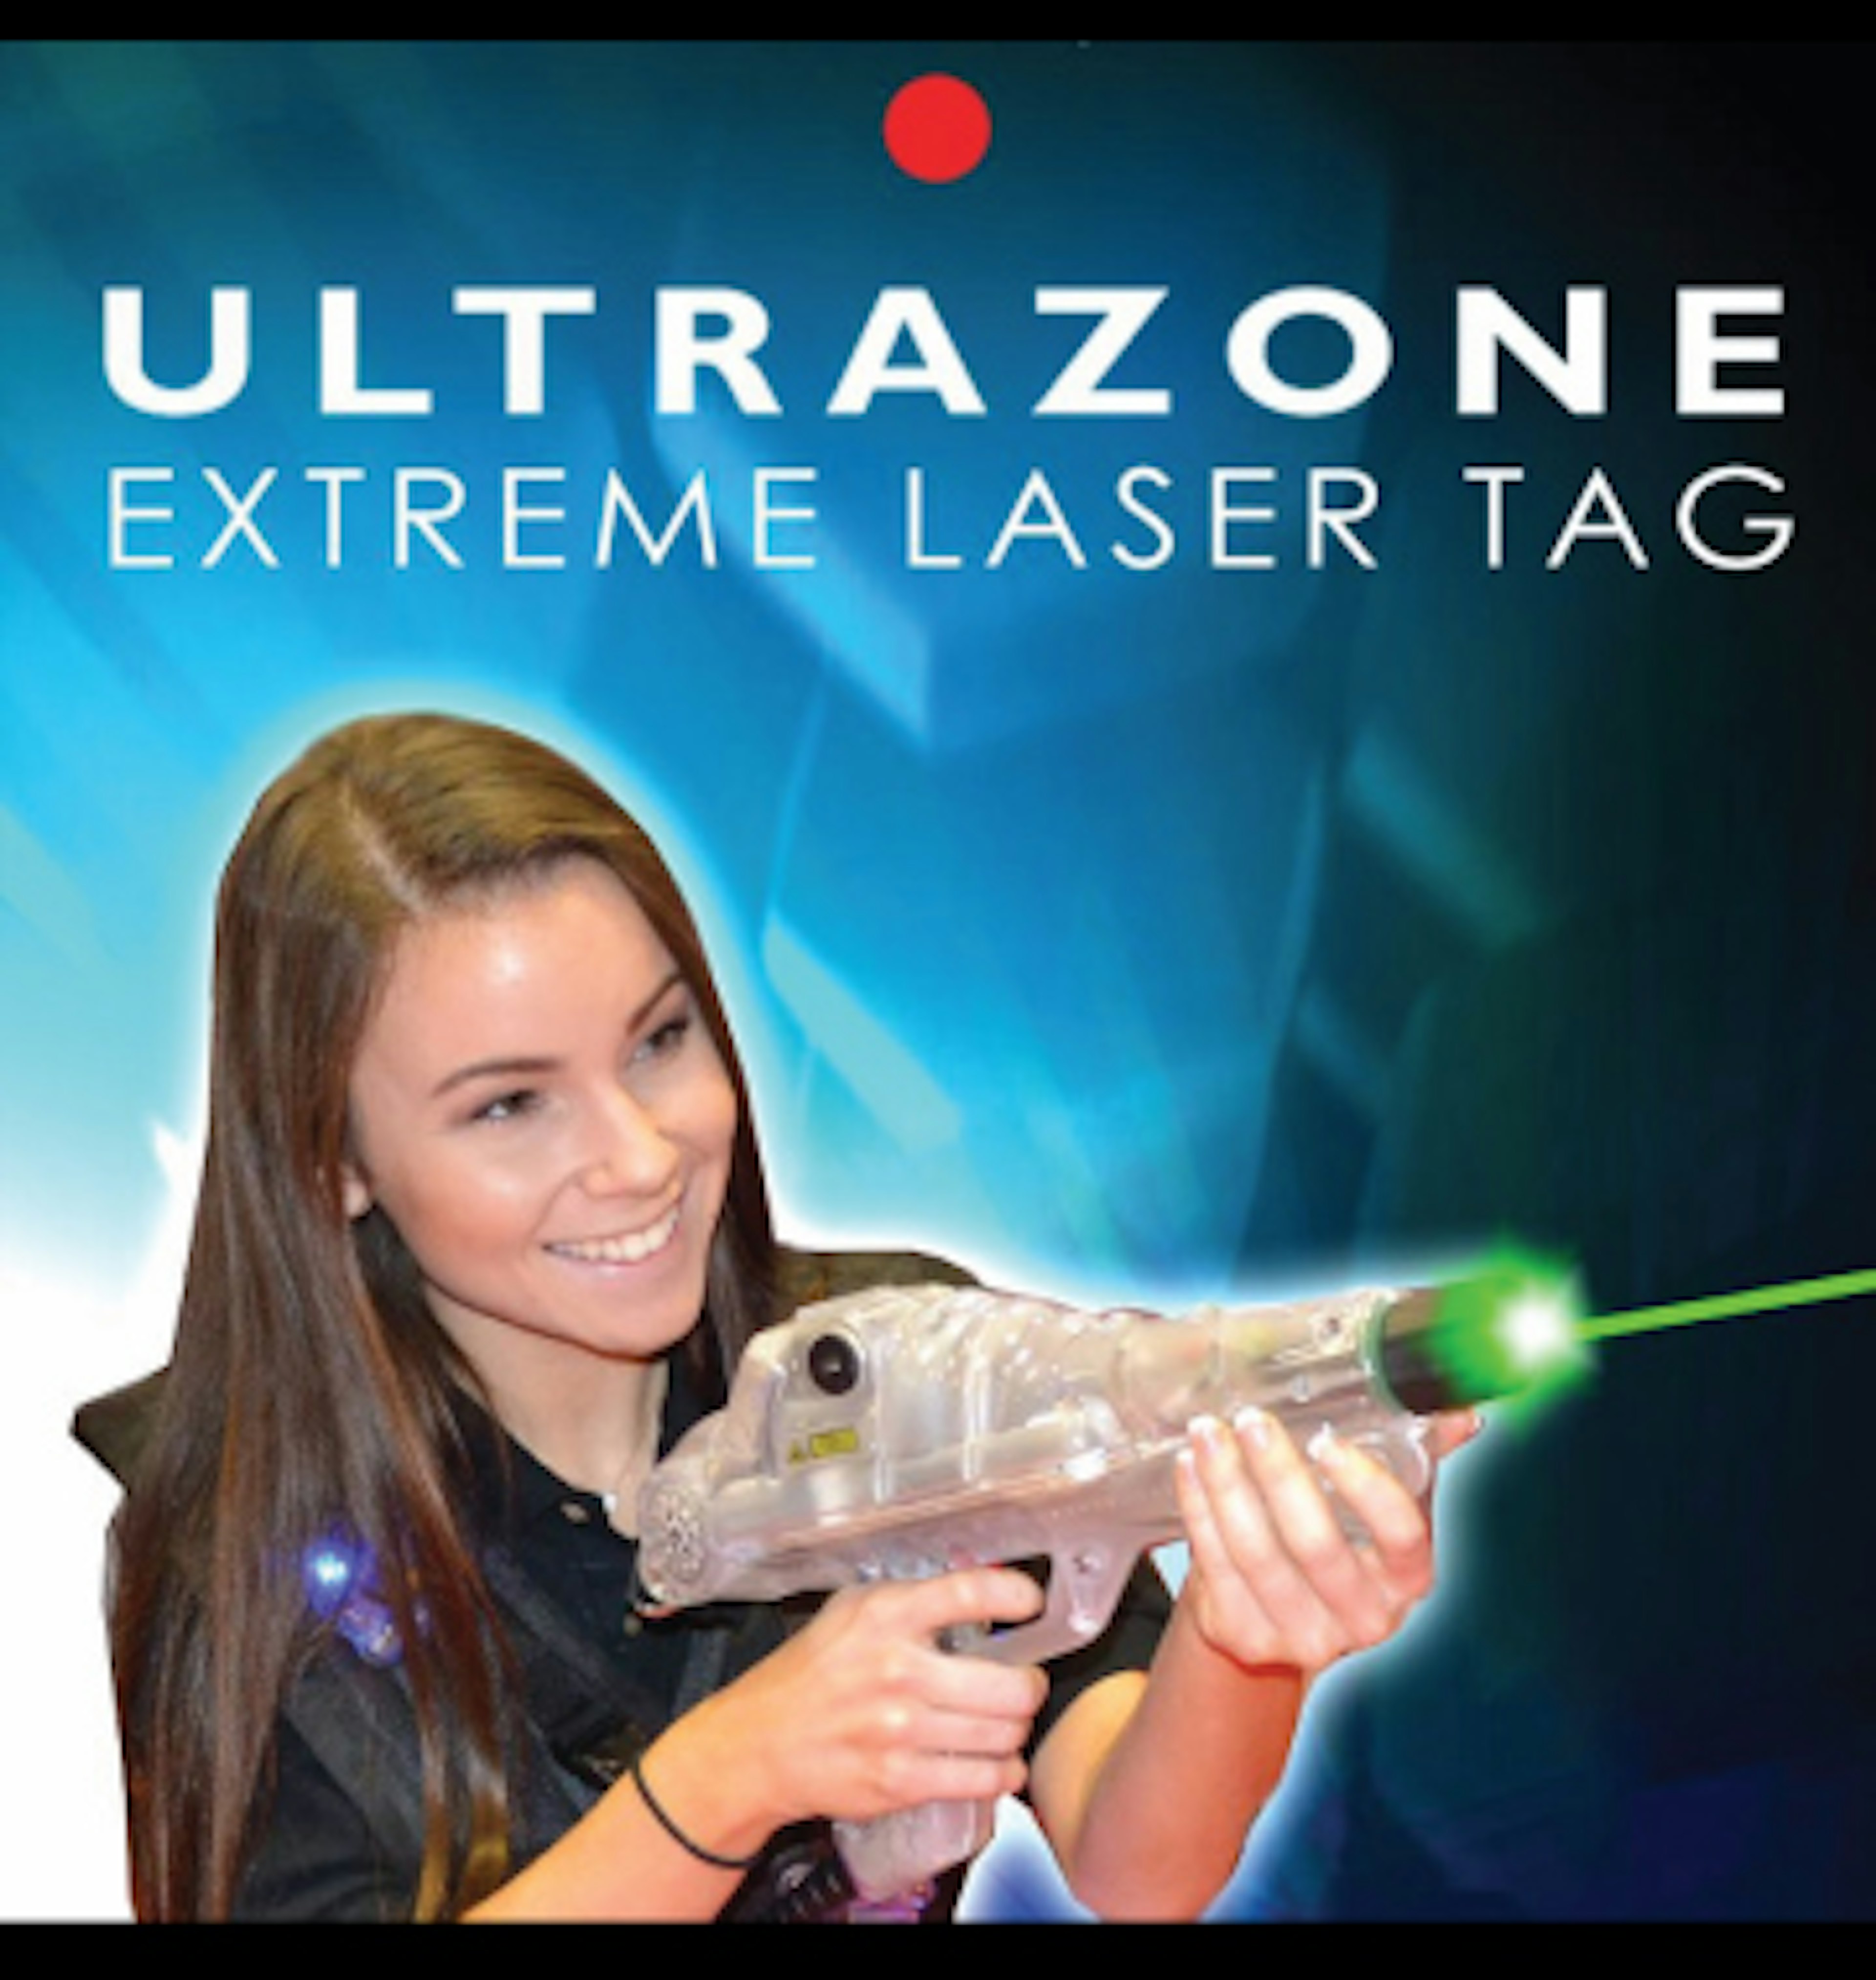 ULTRAZONE Xtreme Laser Tag